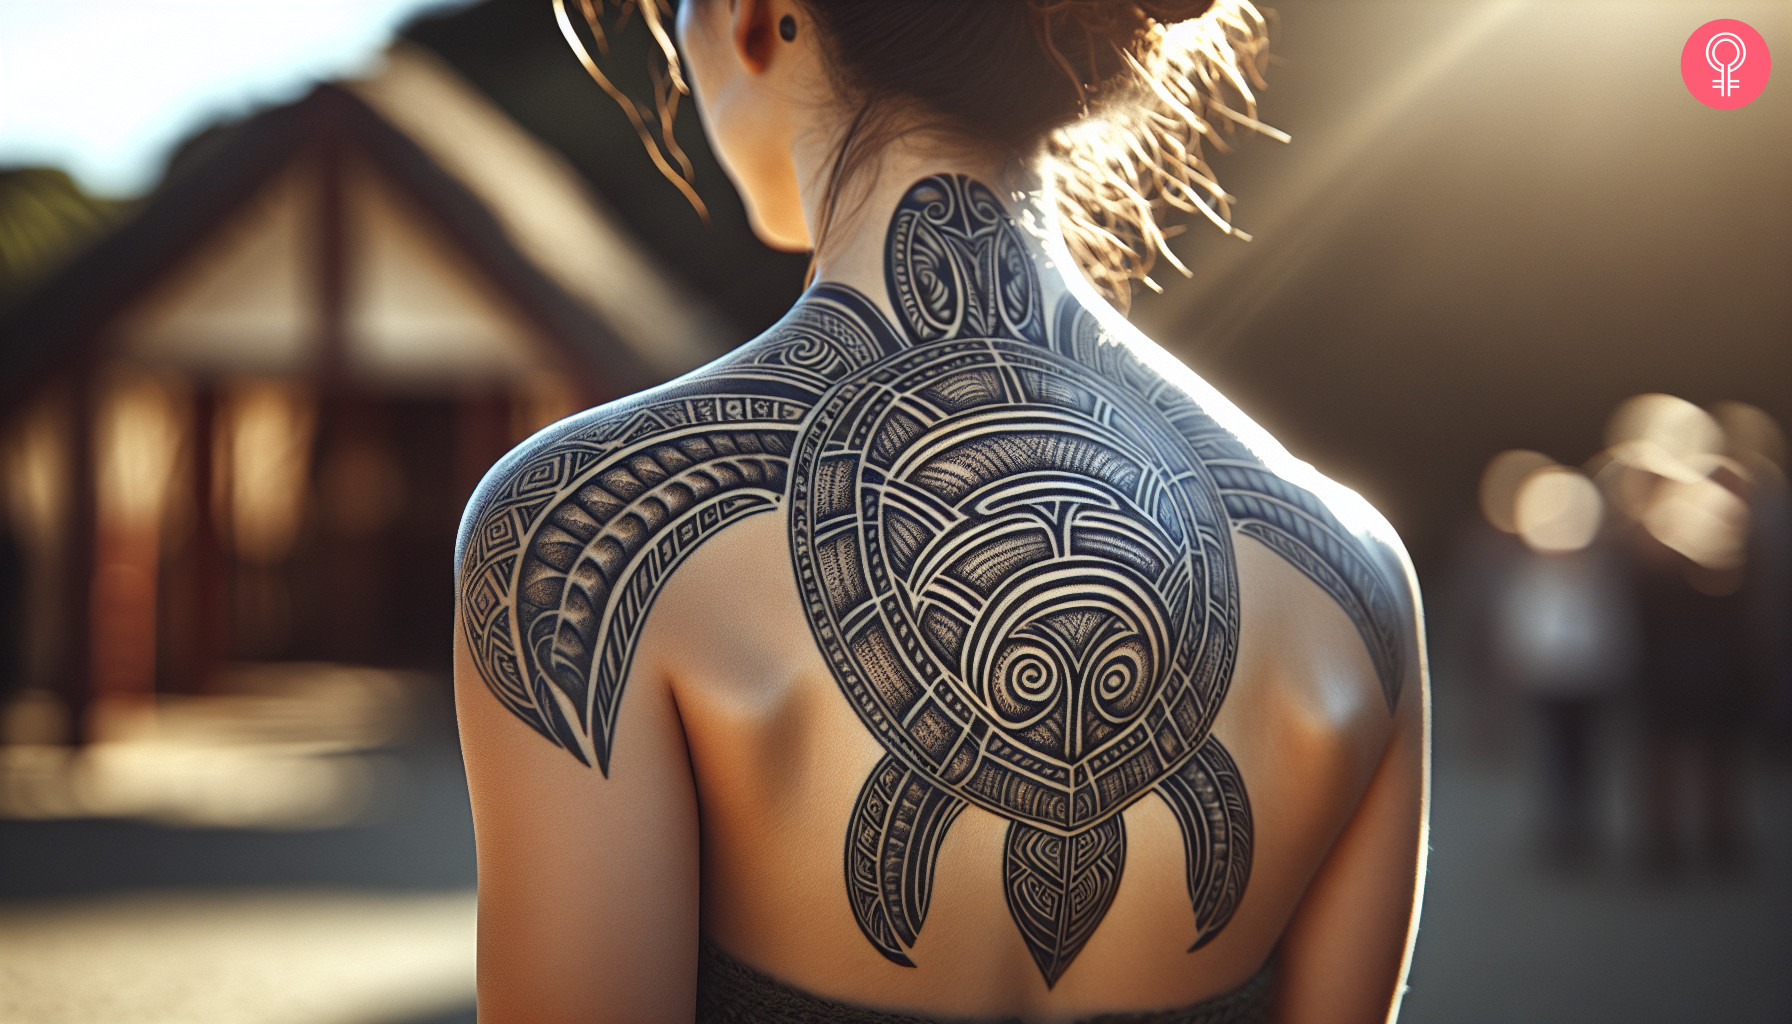 Turtle shell maori tattoo on the shoulder of a woman